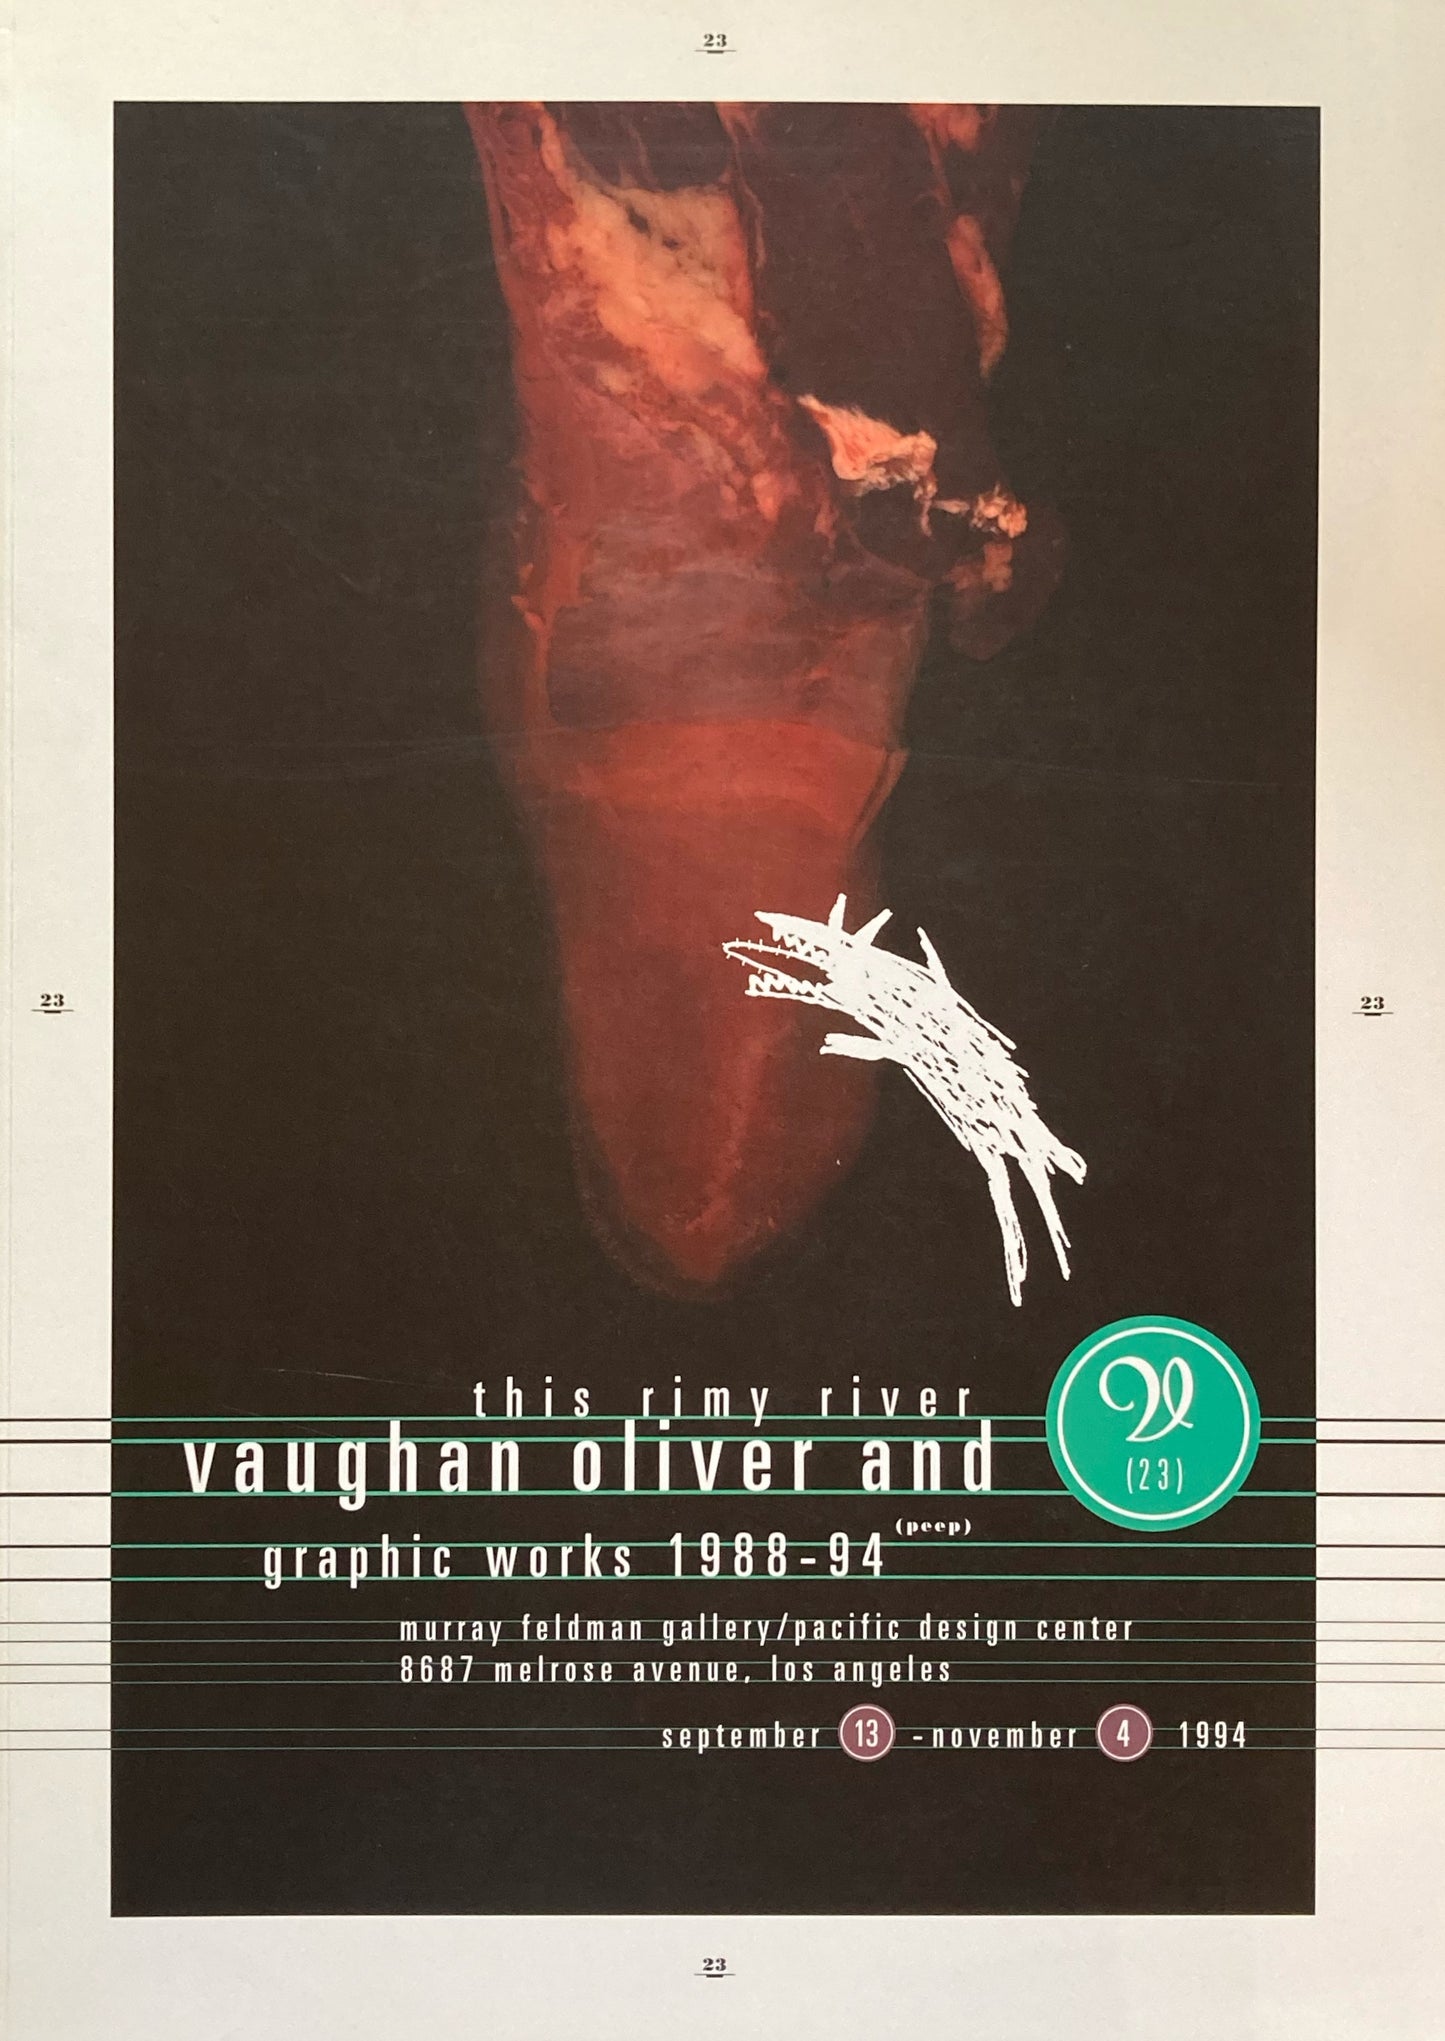 This Rimy River　Vaughn Oliver and Graphic Works 1988-94